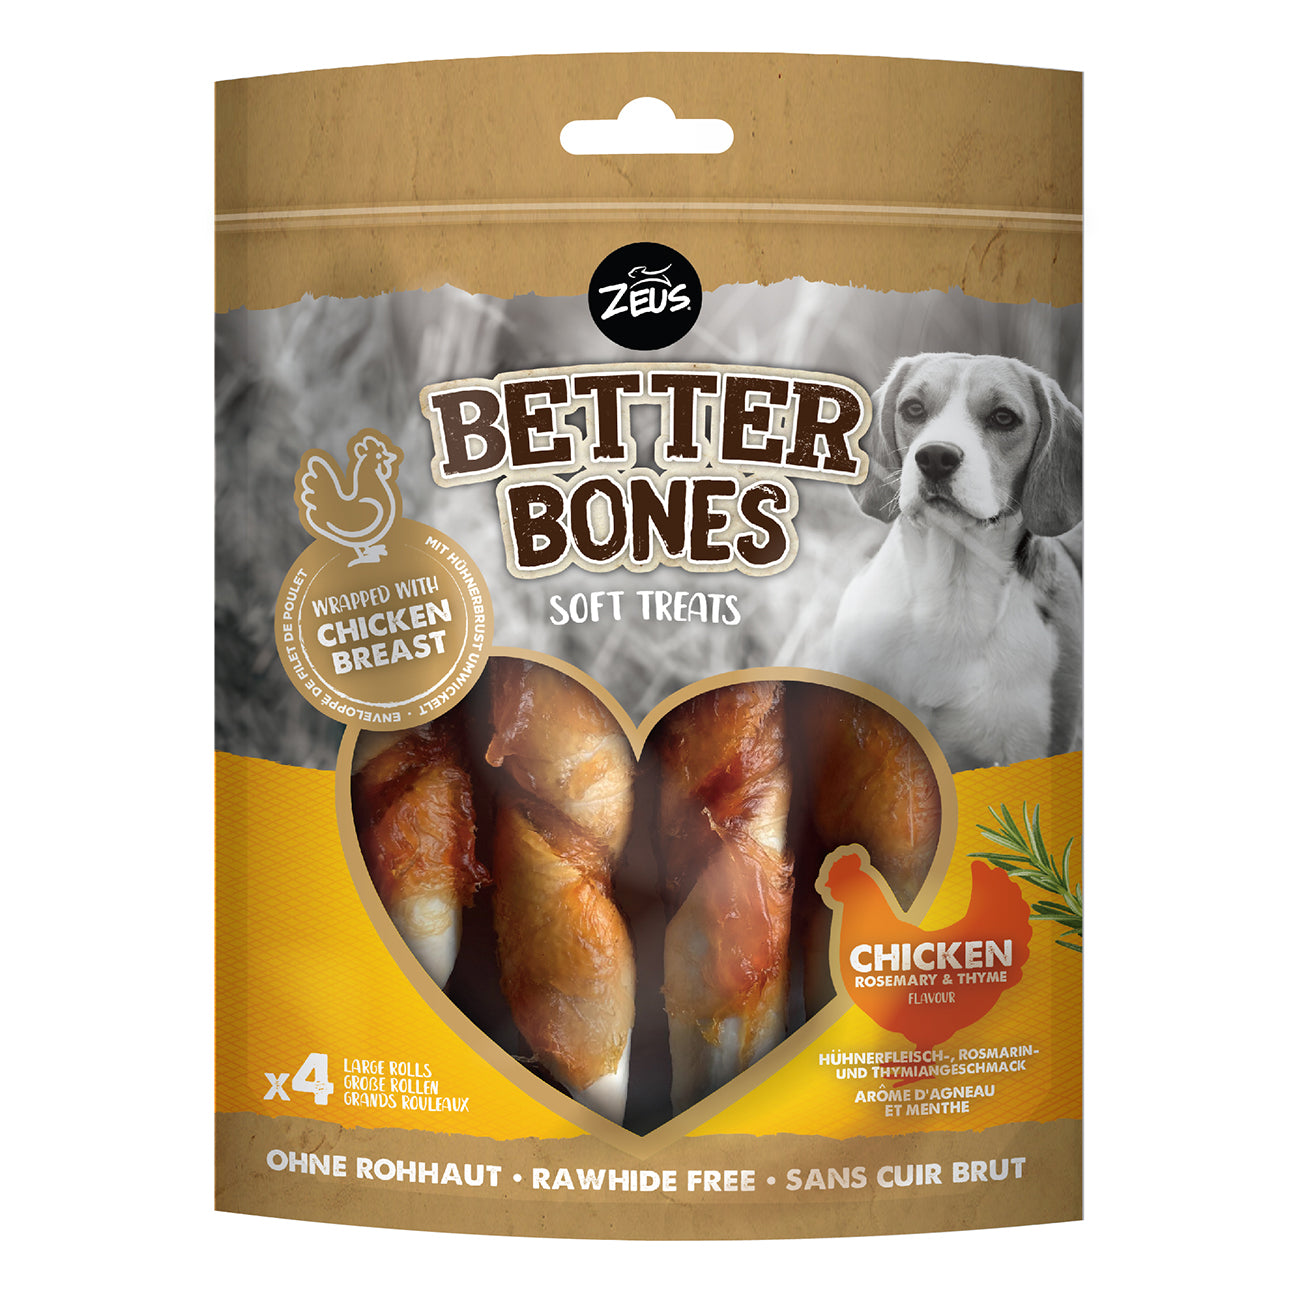 Zeus Better Bones Chicken Large Rolls with Wrapped Chicken Pack of 4